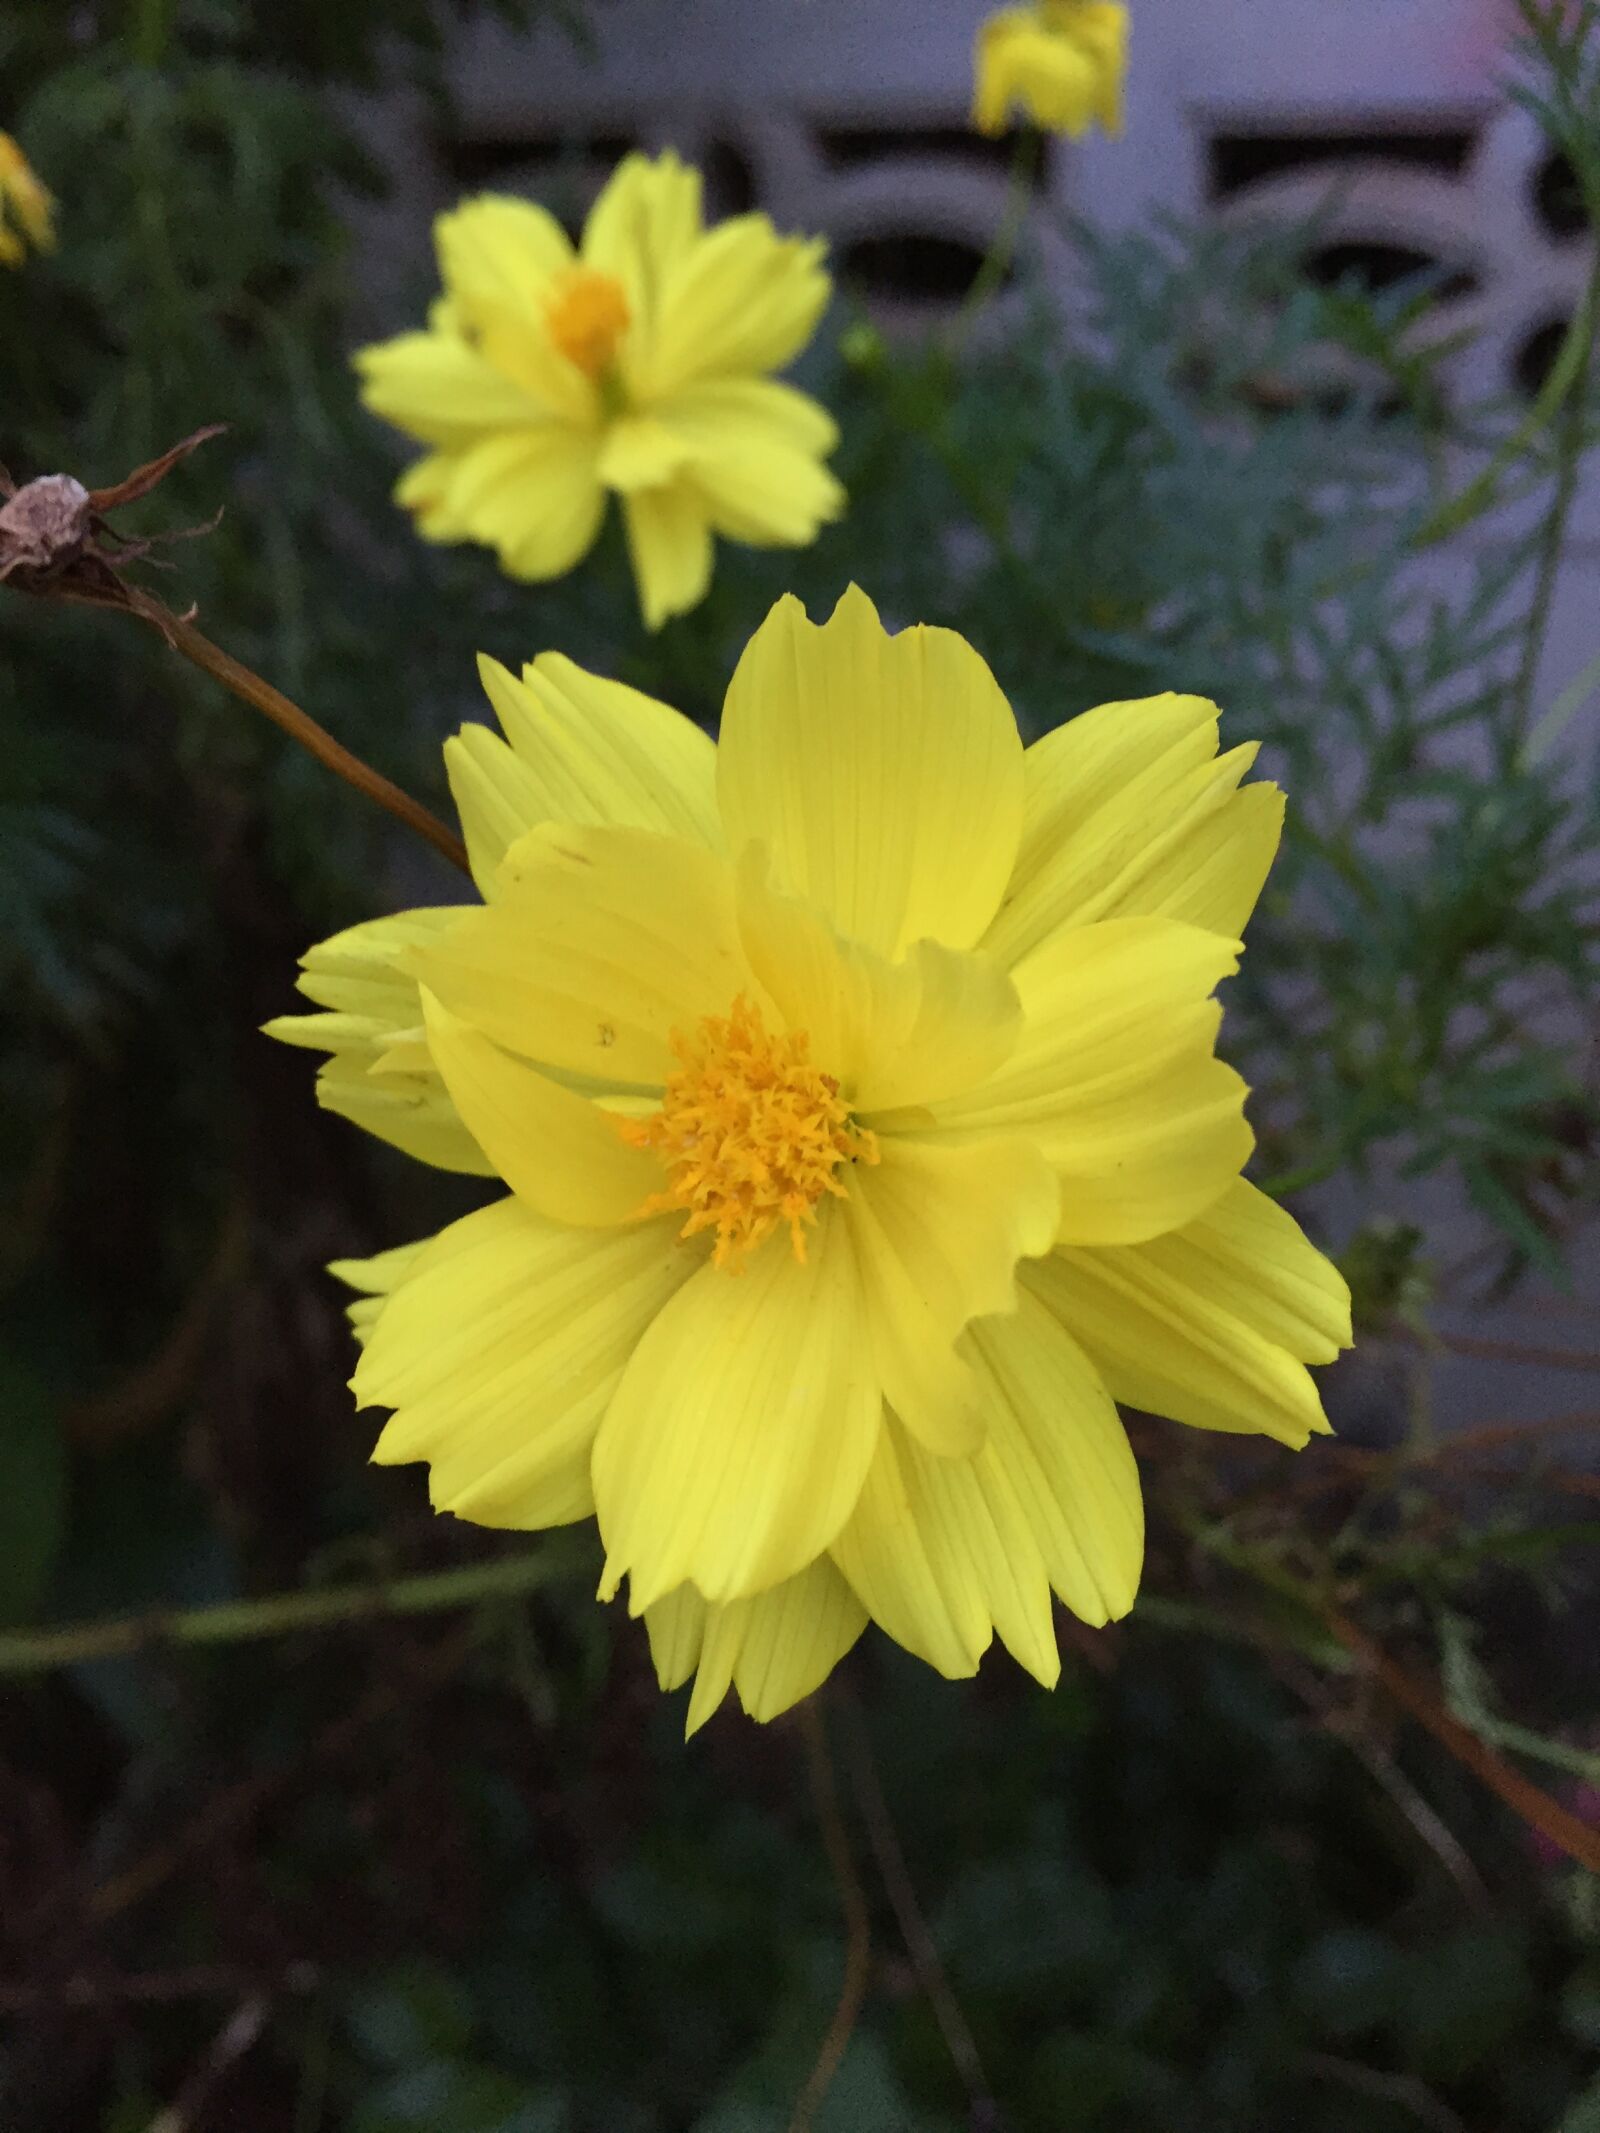 Apple iPhone 6 + iPhone 6 back camera 4.15mm f/2.2 sample photo. Yellow, flower, nature photography